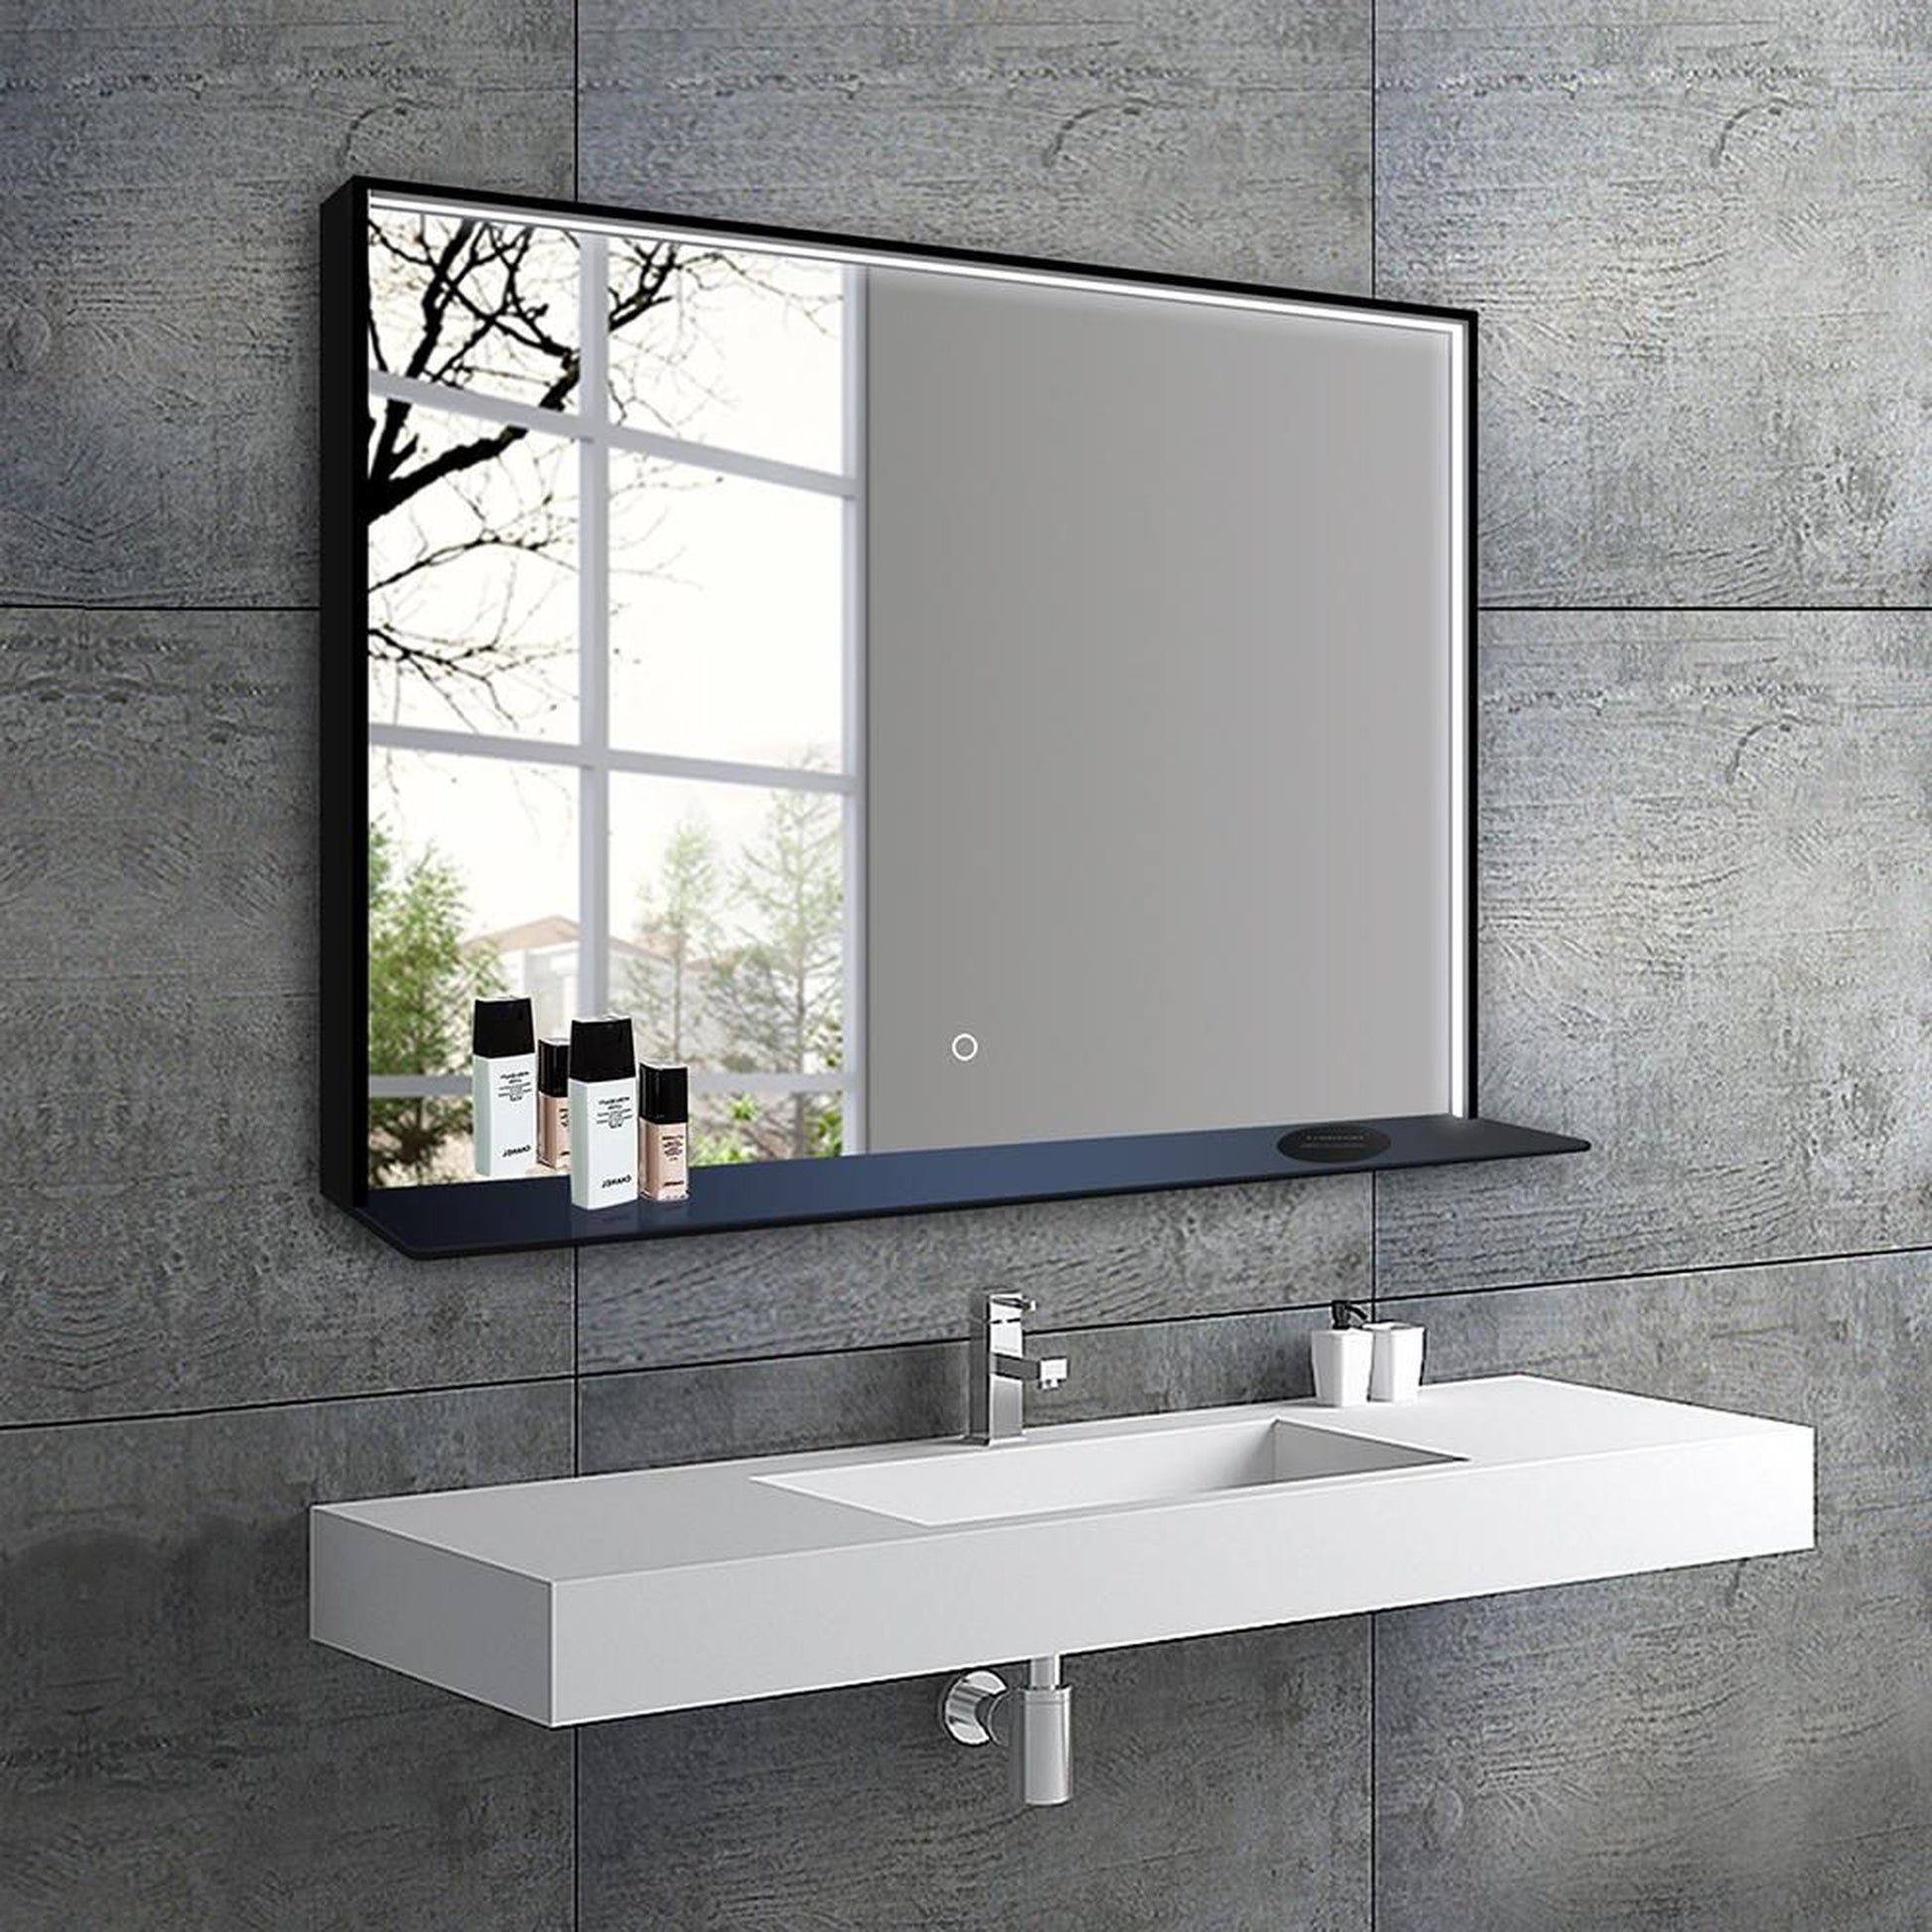 DreamWerks 40" W x 24" H LED Mirror with Wireless Cellphone Charger